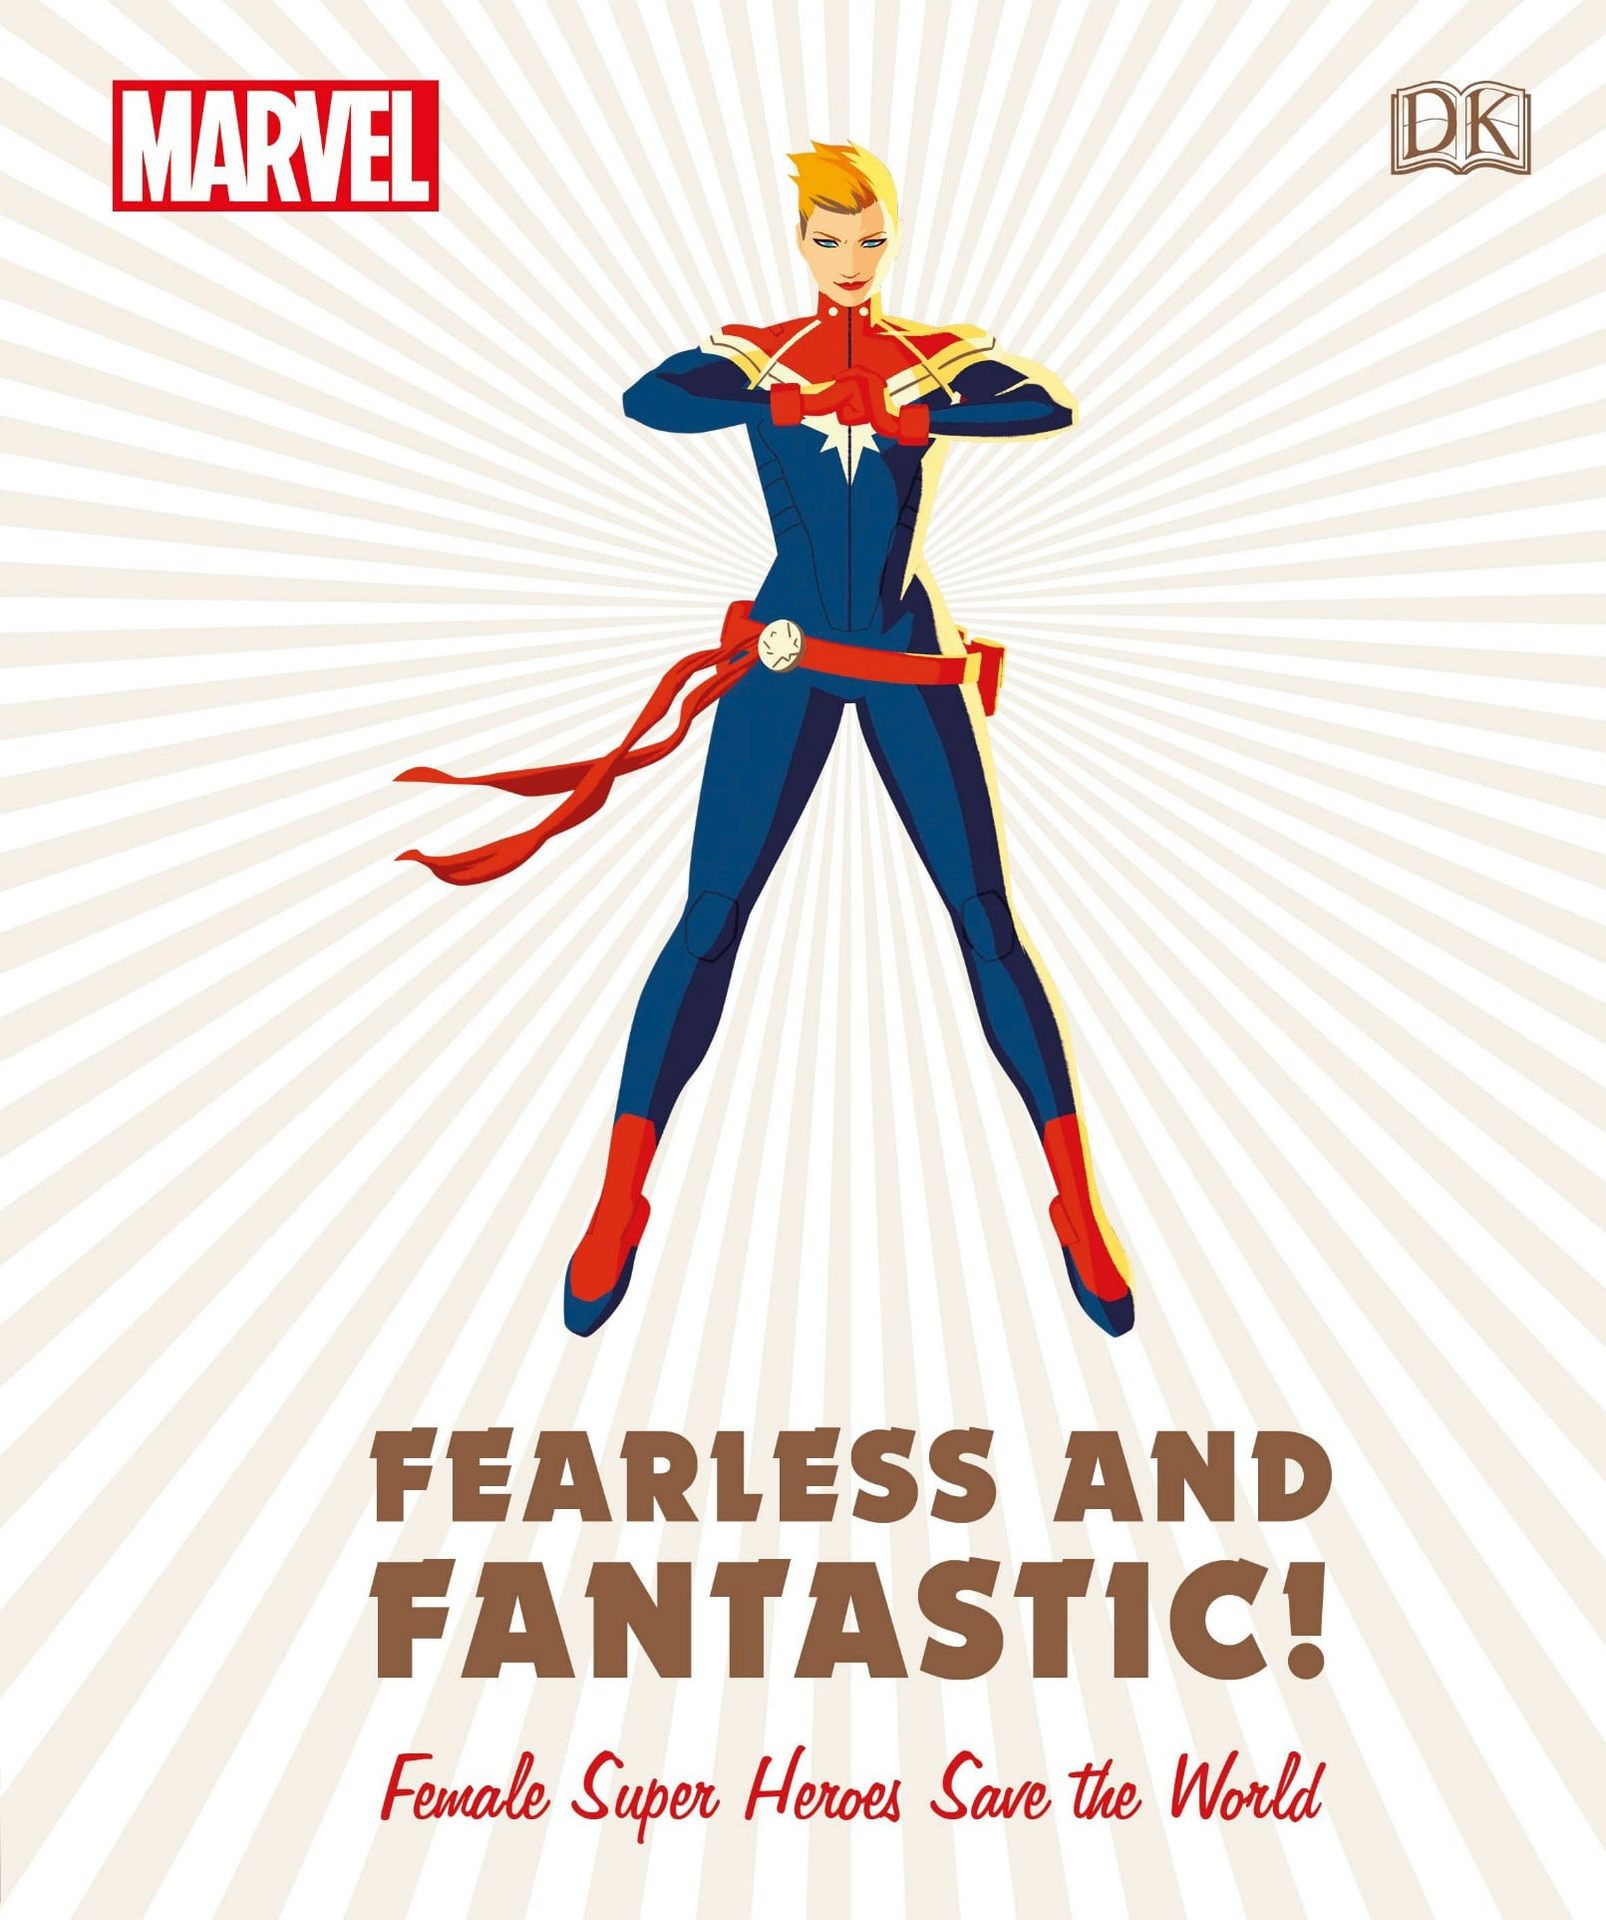 Marvel Fearless and Fantastic! Female Super Heroes Save the World | Sam Maggs, Emma Grange, Ruth Amos